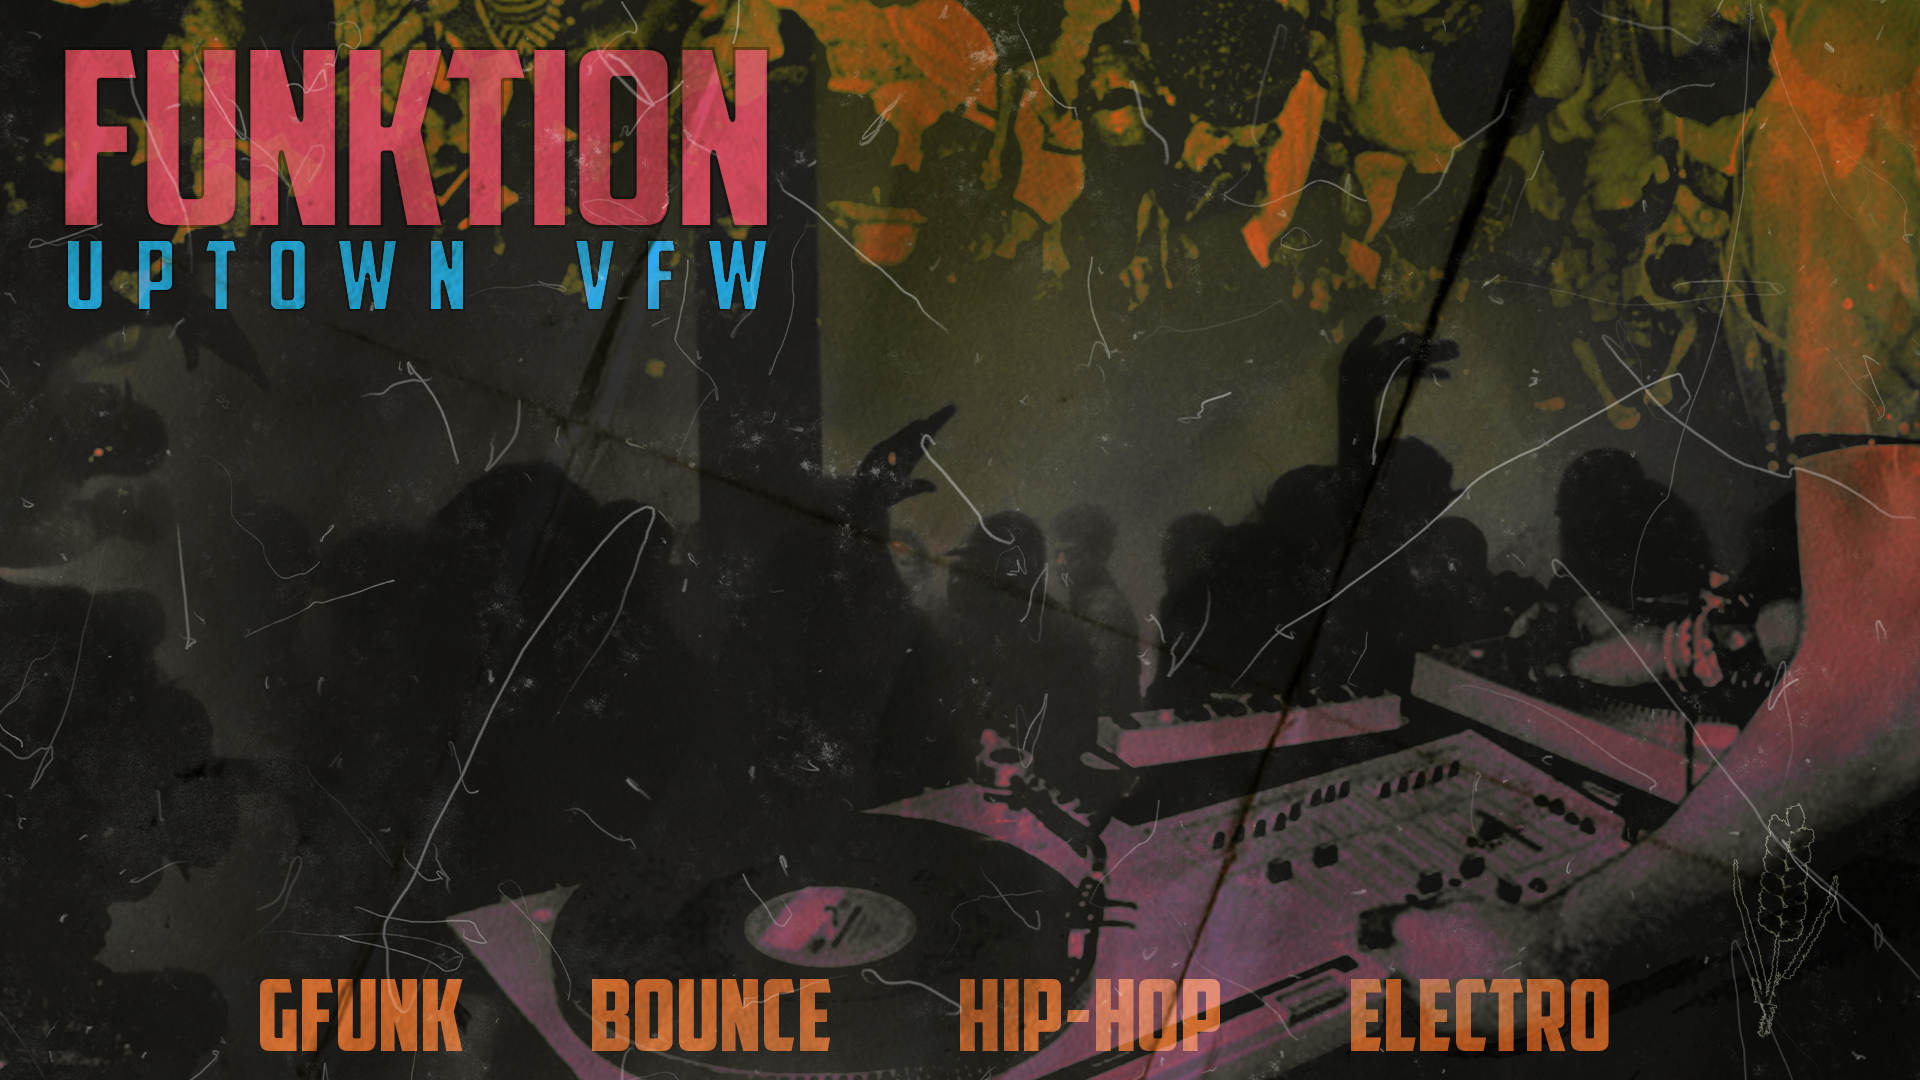 Funktion Friday, April 28 James Ballentine "Uptown" VFW Post 246 2916 Lyndale Ave S. Doors 10:00pm :: Music 10:00pm :: 21+ GA $5 ADV / $10 DOS NO REFUNDS